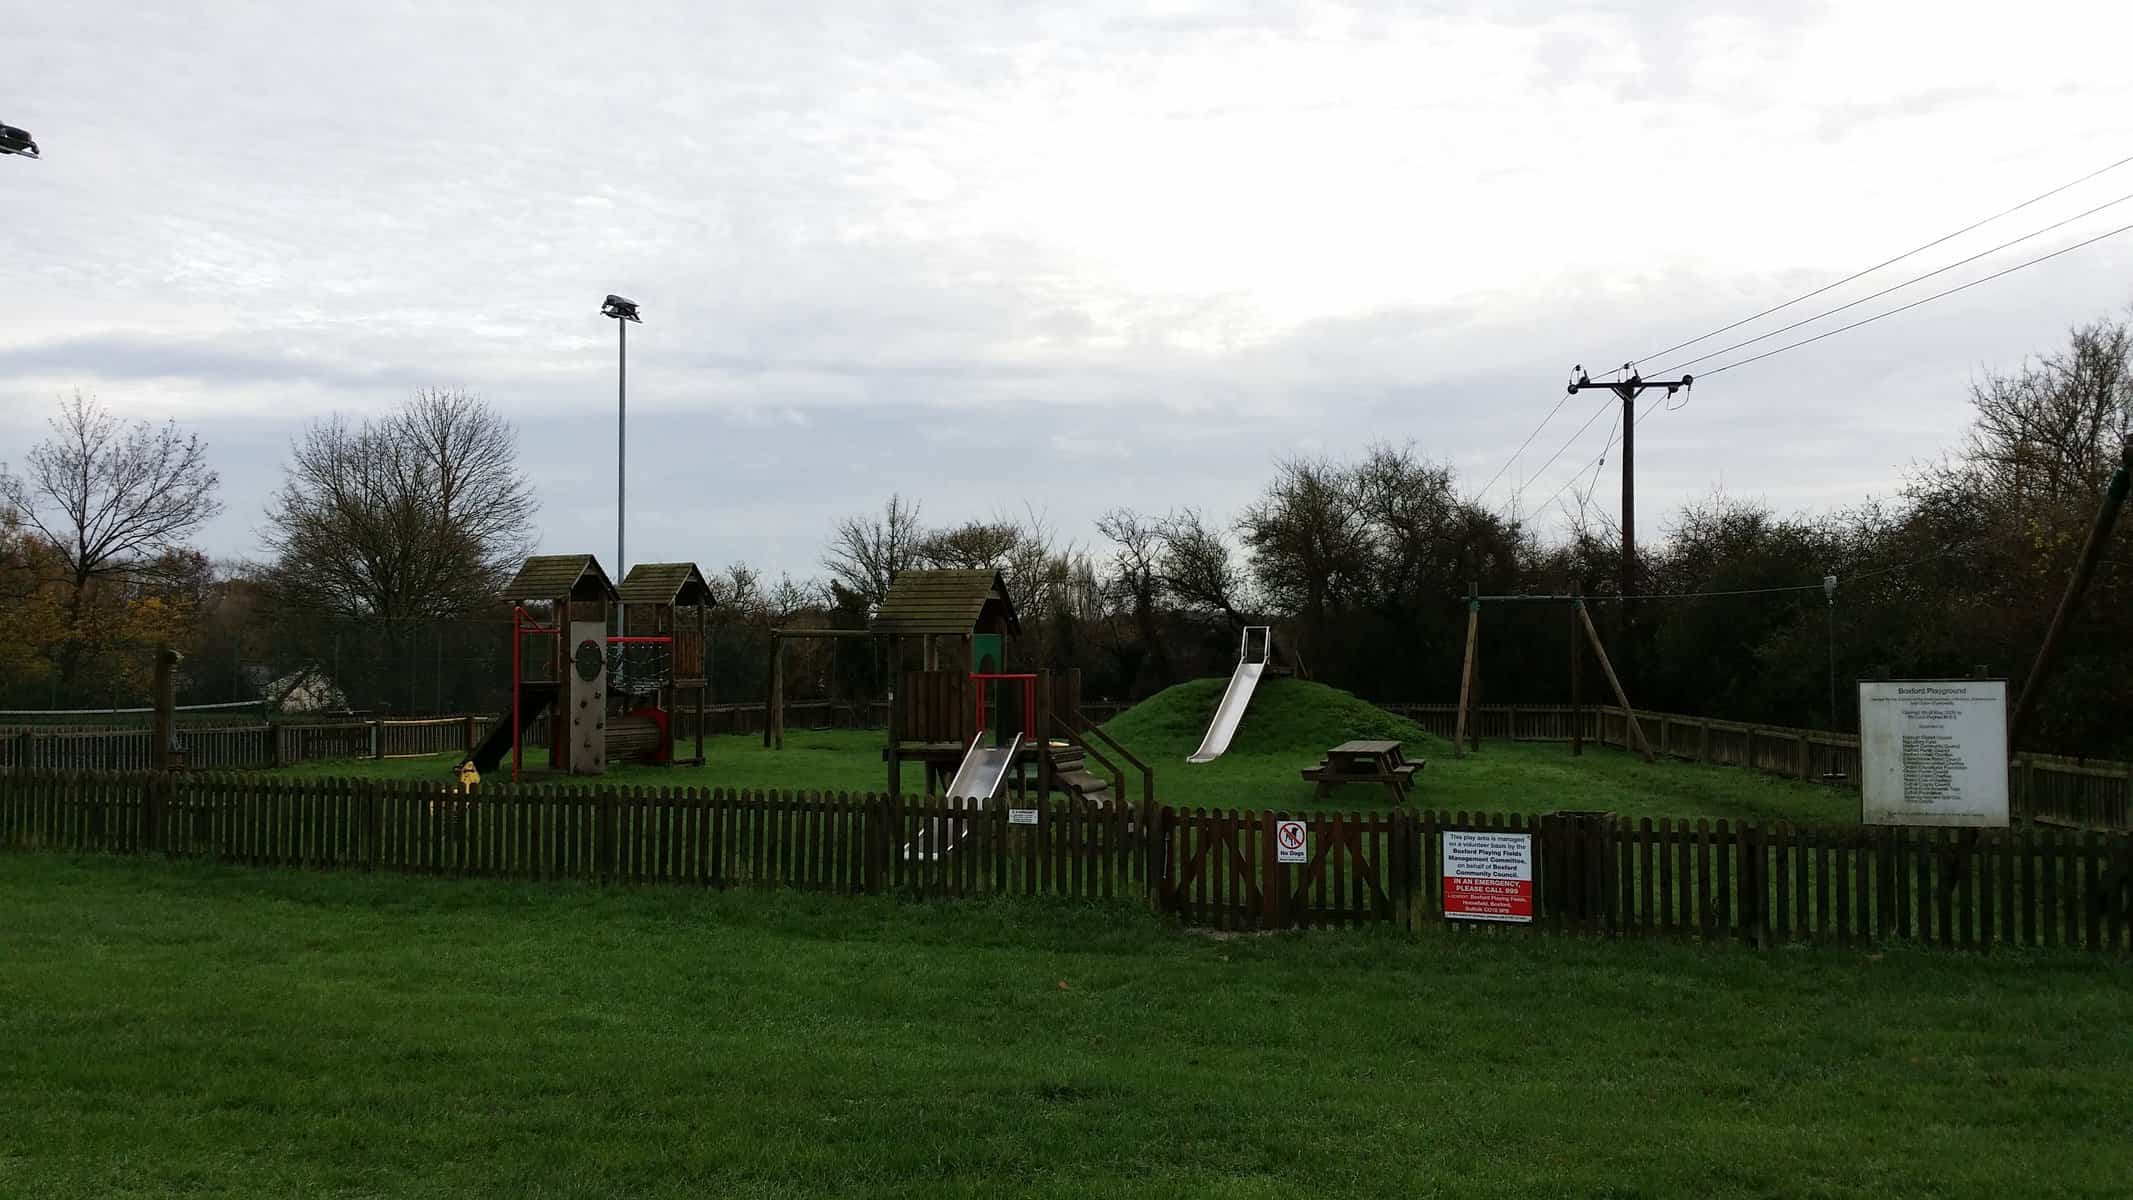 Boxford Playground and Playing Fields, Suffolk